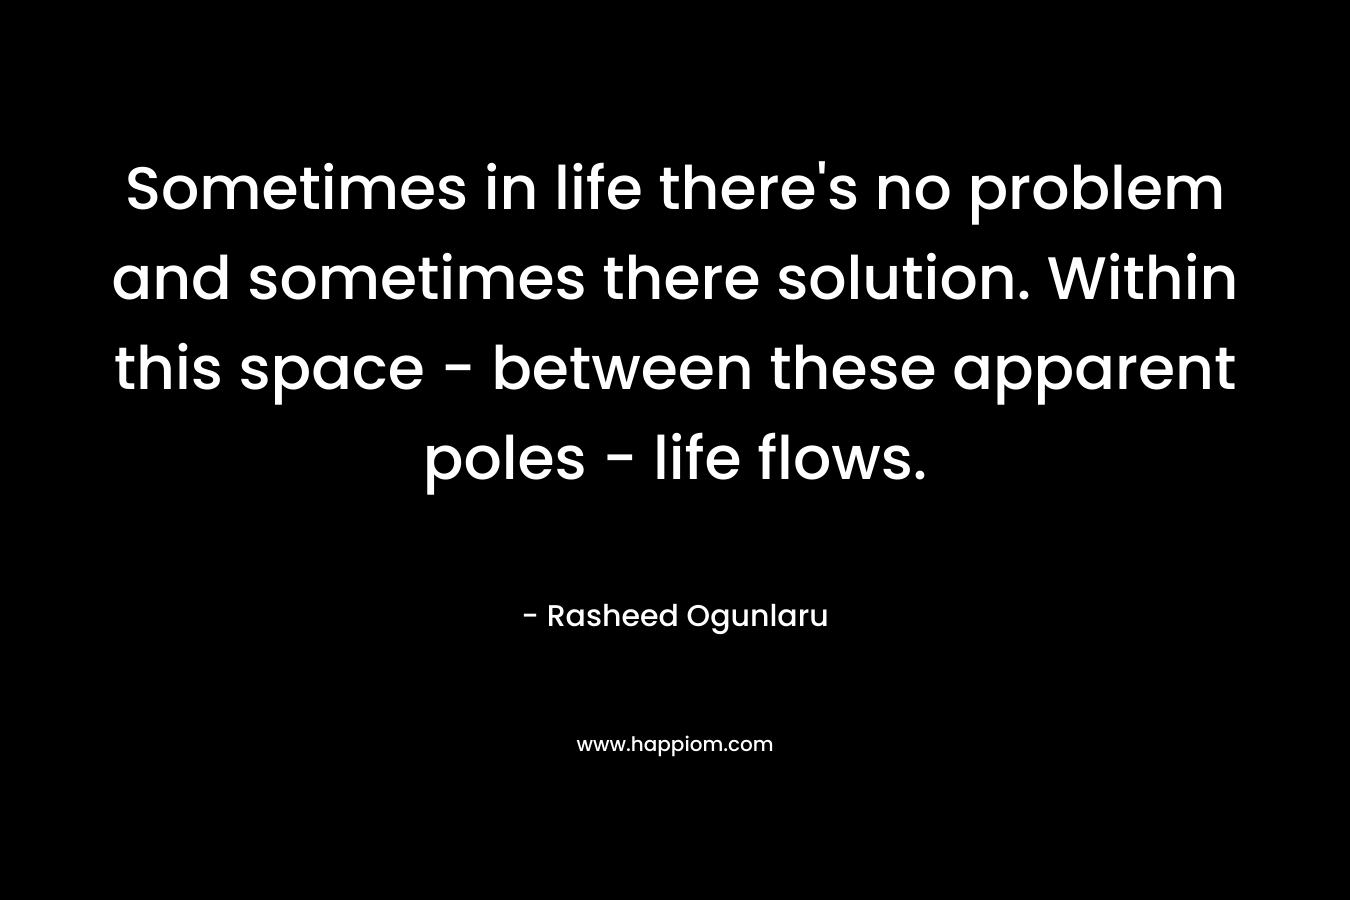 Sometimes in life there’s no problem and sometimes there solution. Within this space – between these apparent poles – life flows. – Rasheed Ogunlaru